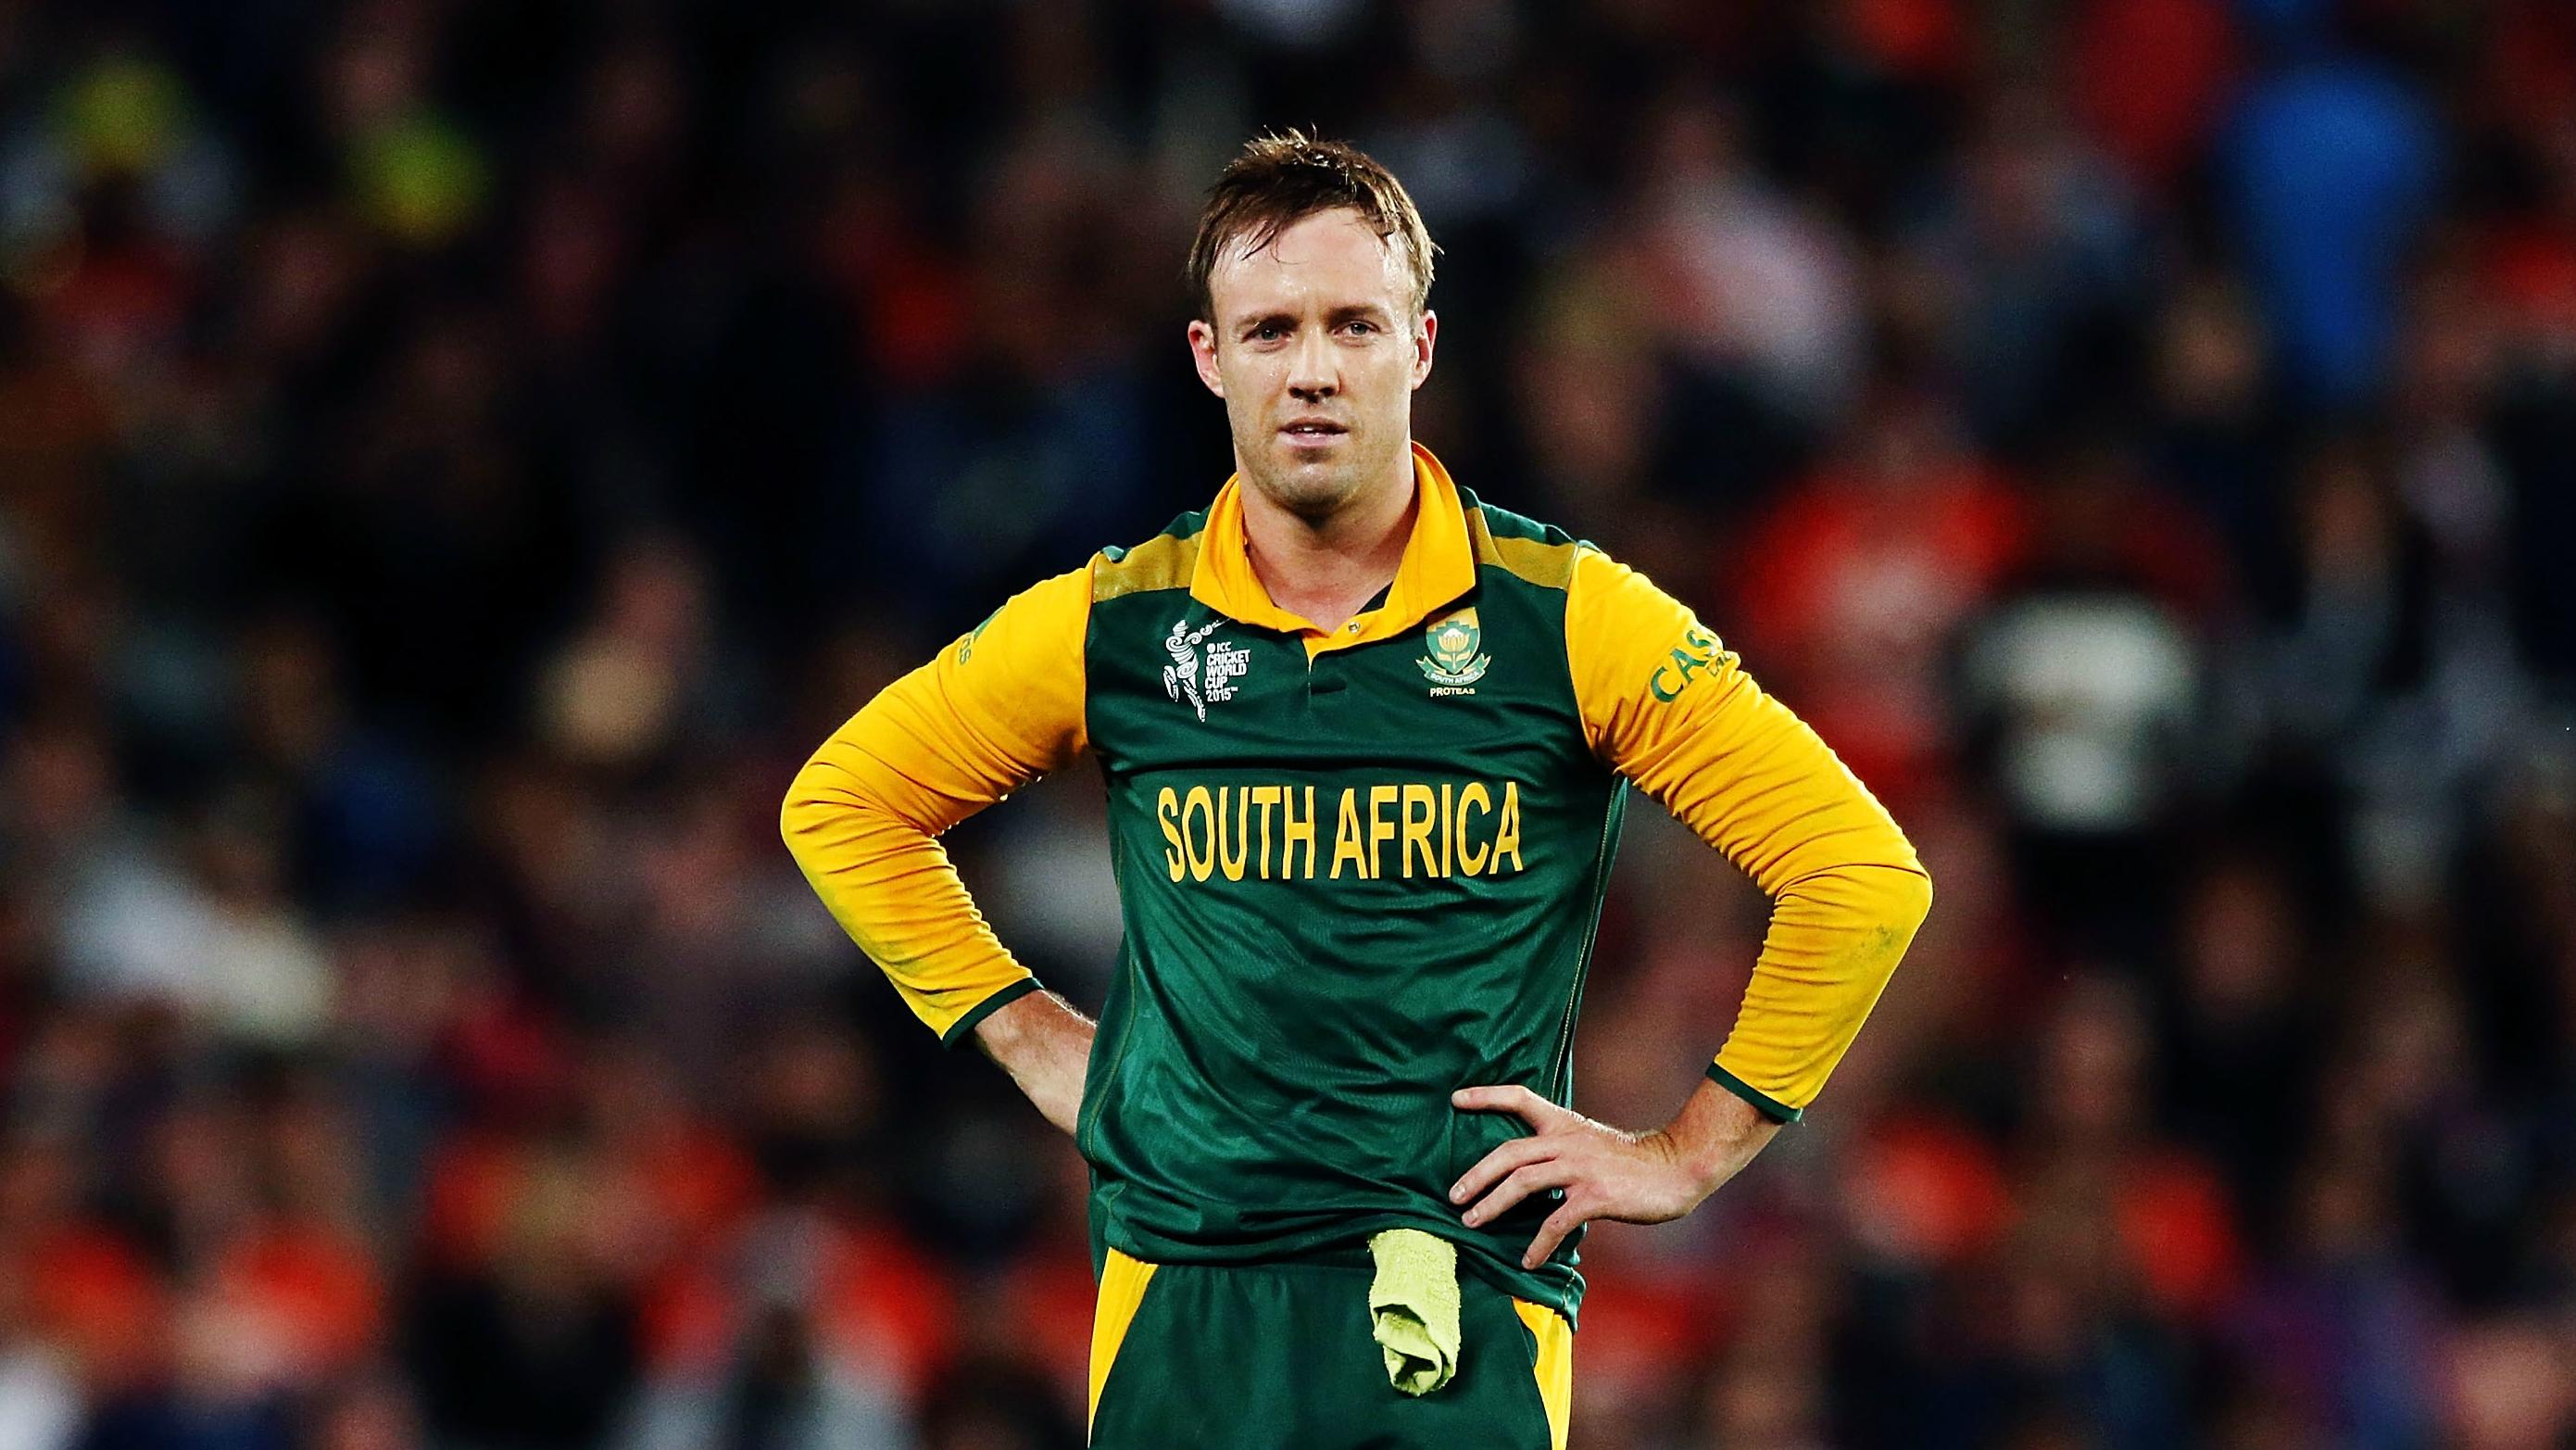 Former South African cricketer AB de Villiers